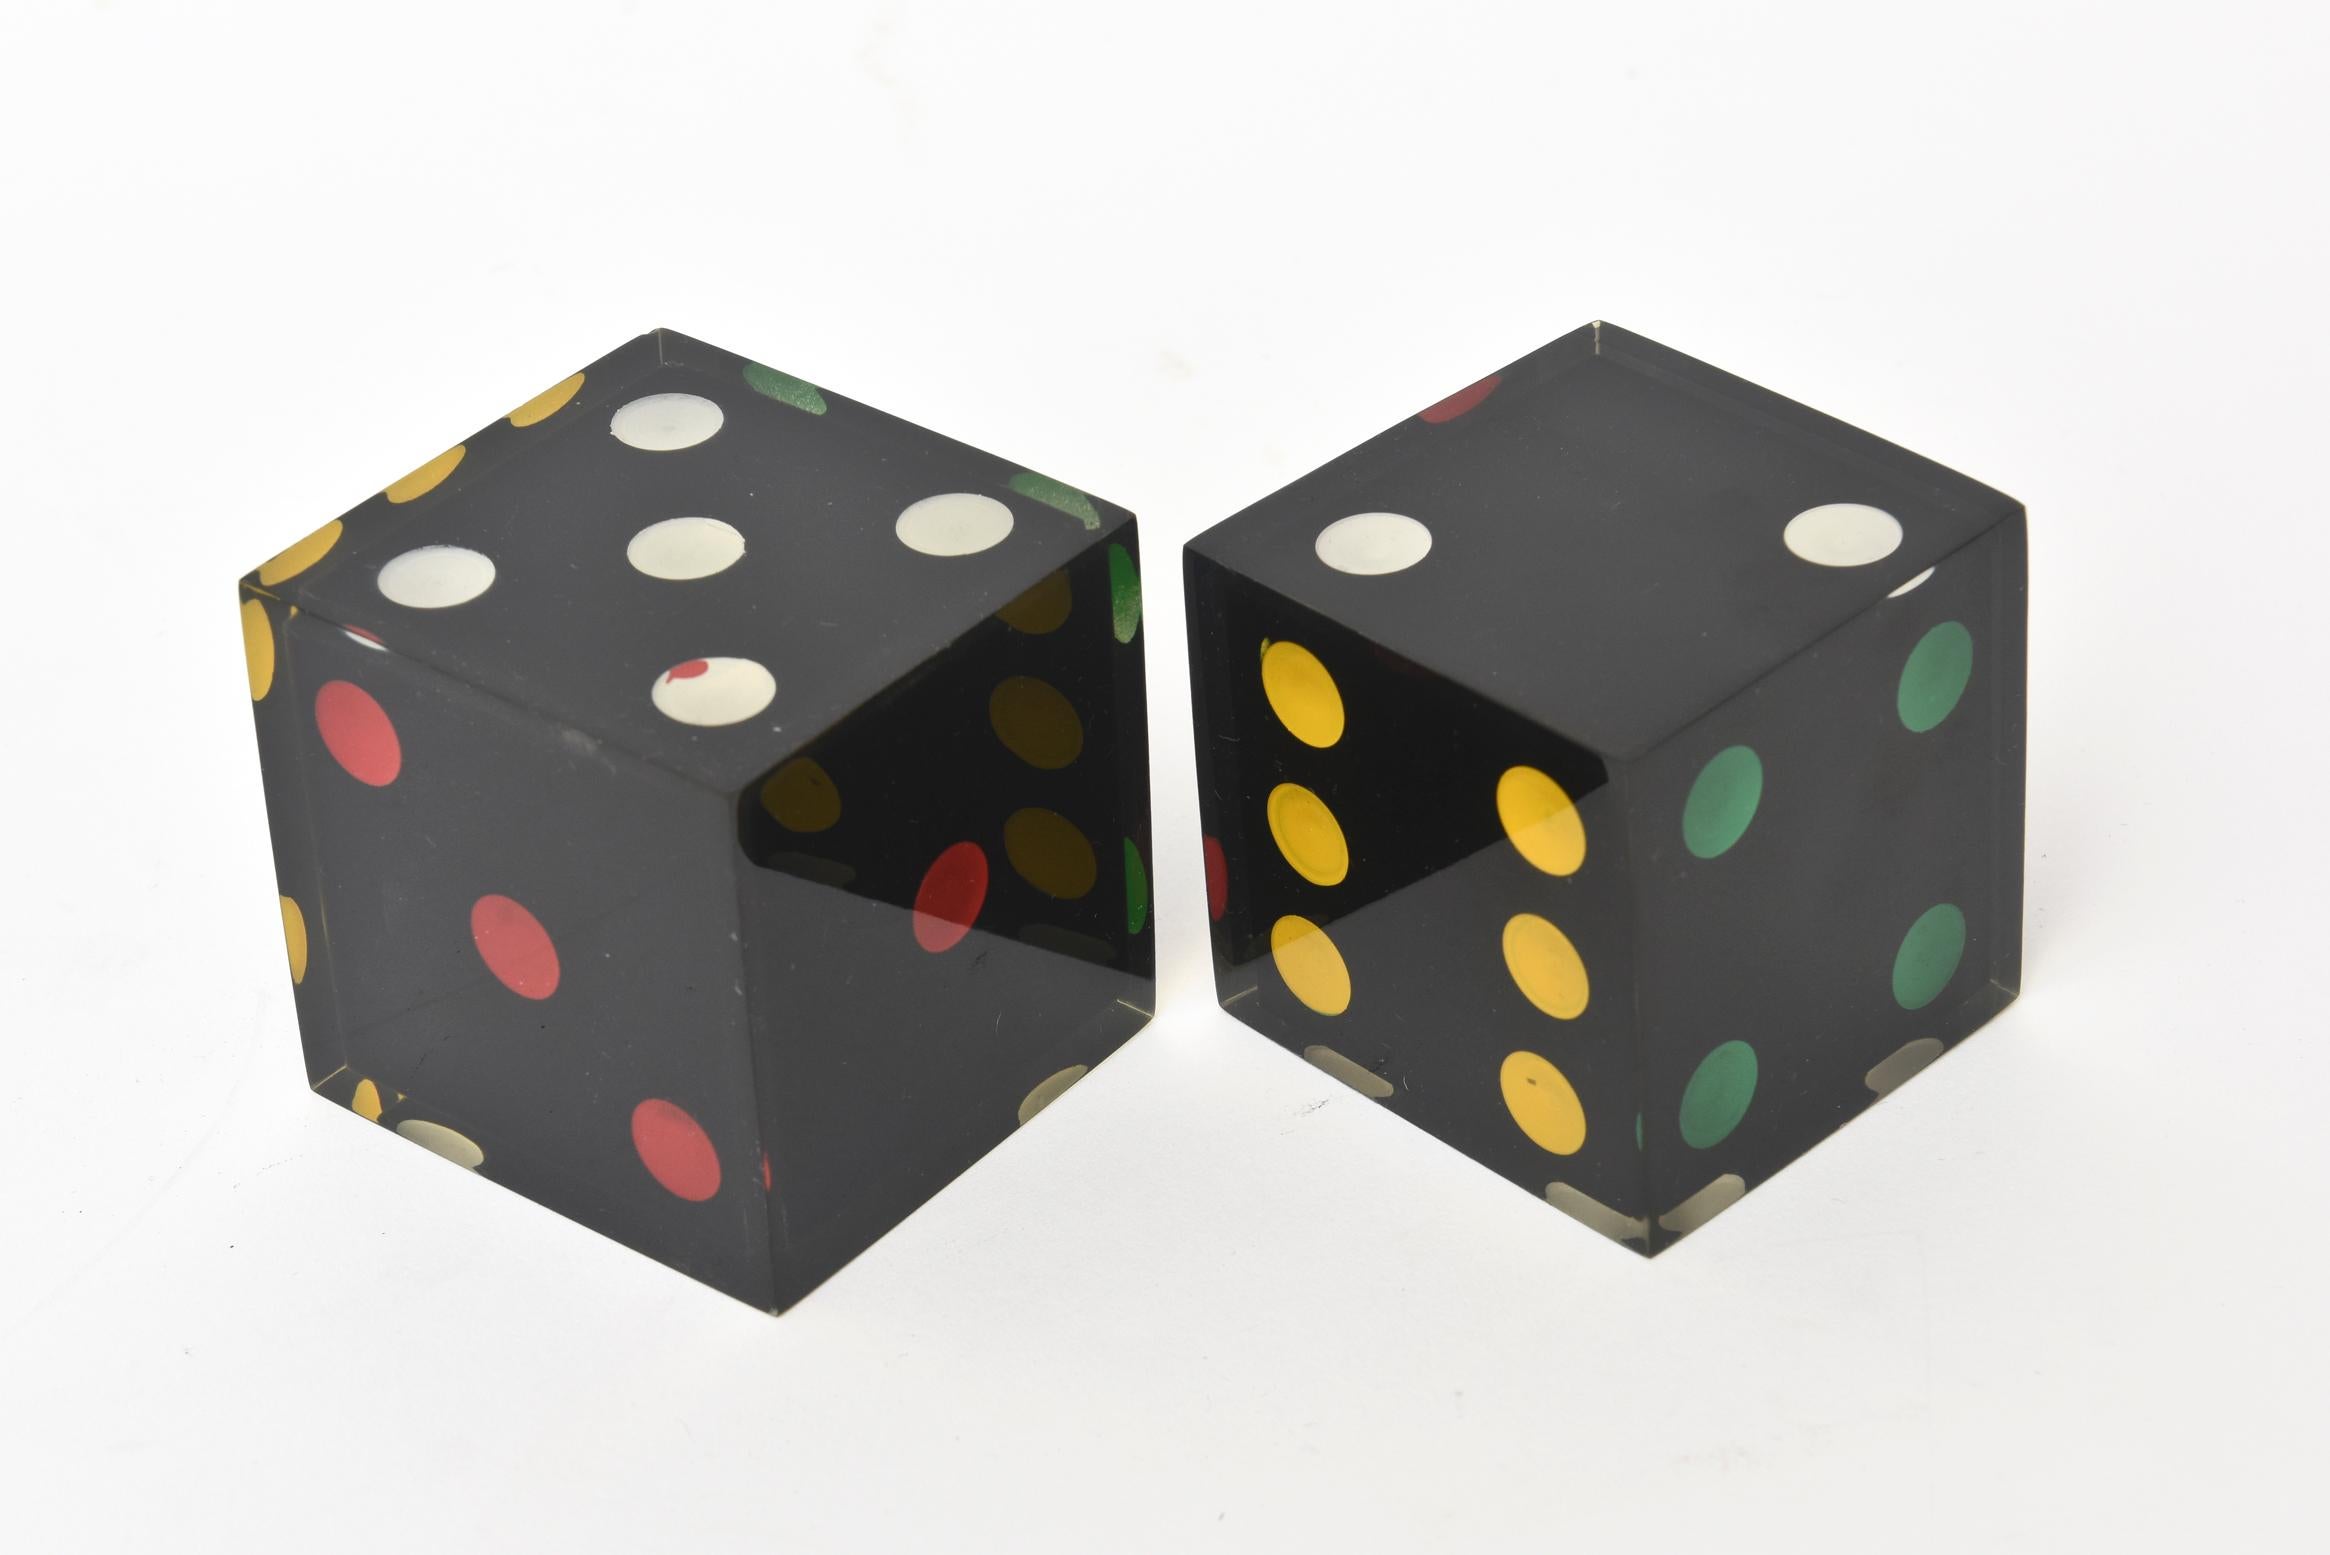 This most unusual and rare pair of French vintage square sculptural lucite large dice have a strong palate of color in primary colors of red, green, white, yellow set against black. They have been polished to the best they can be. These are hard to